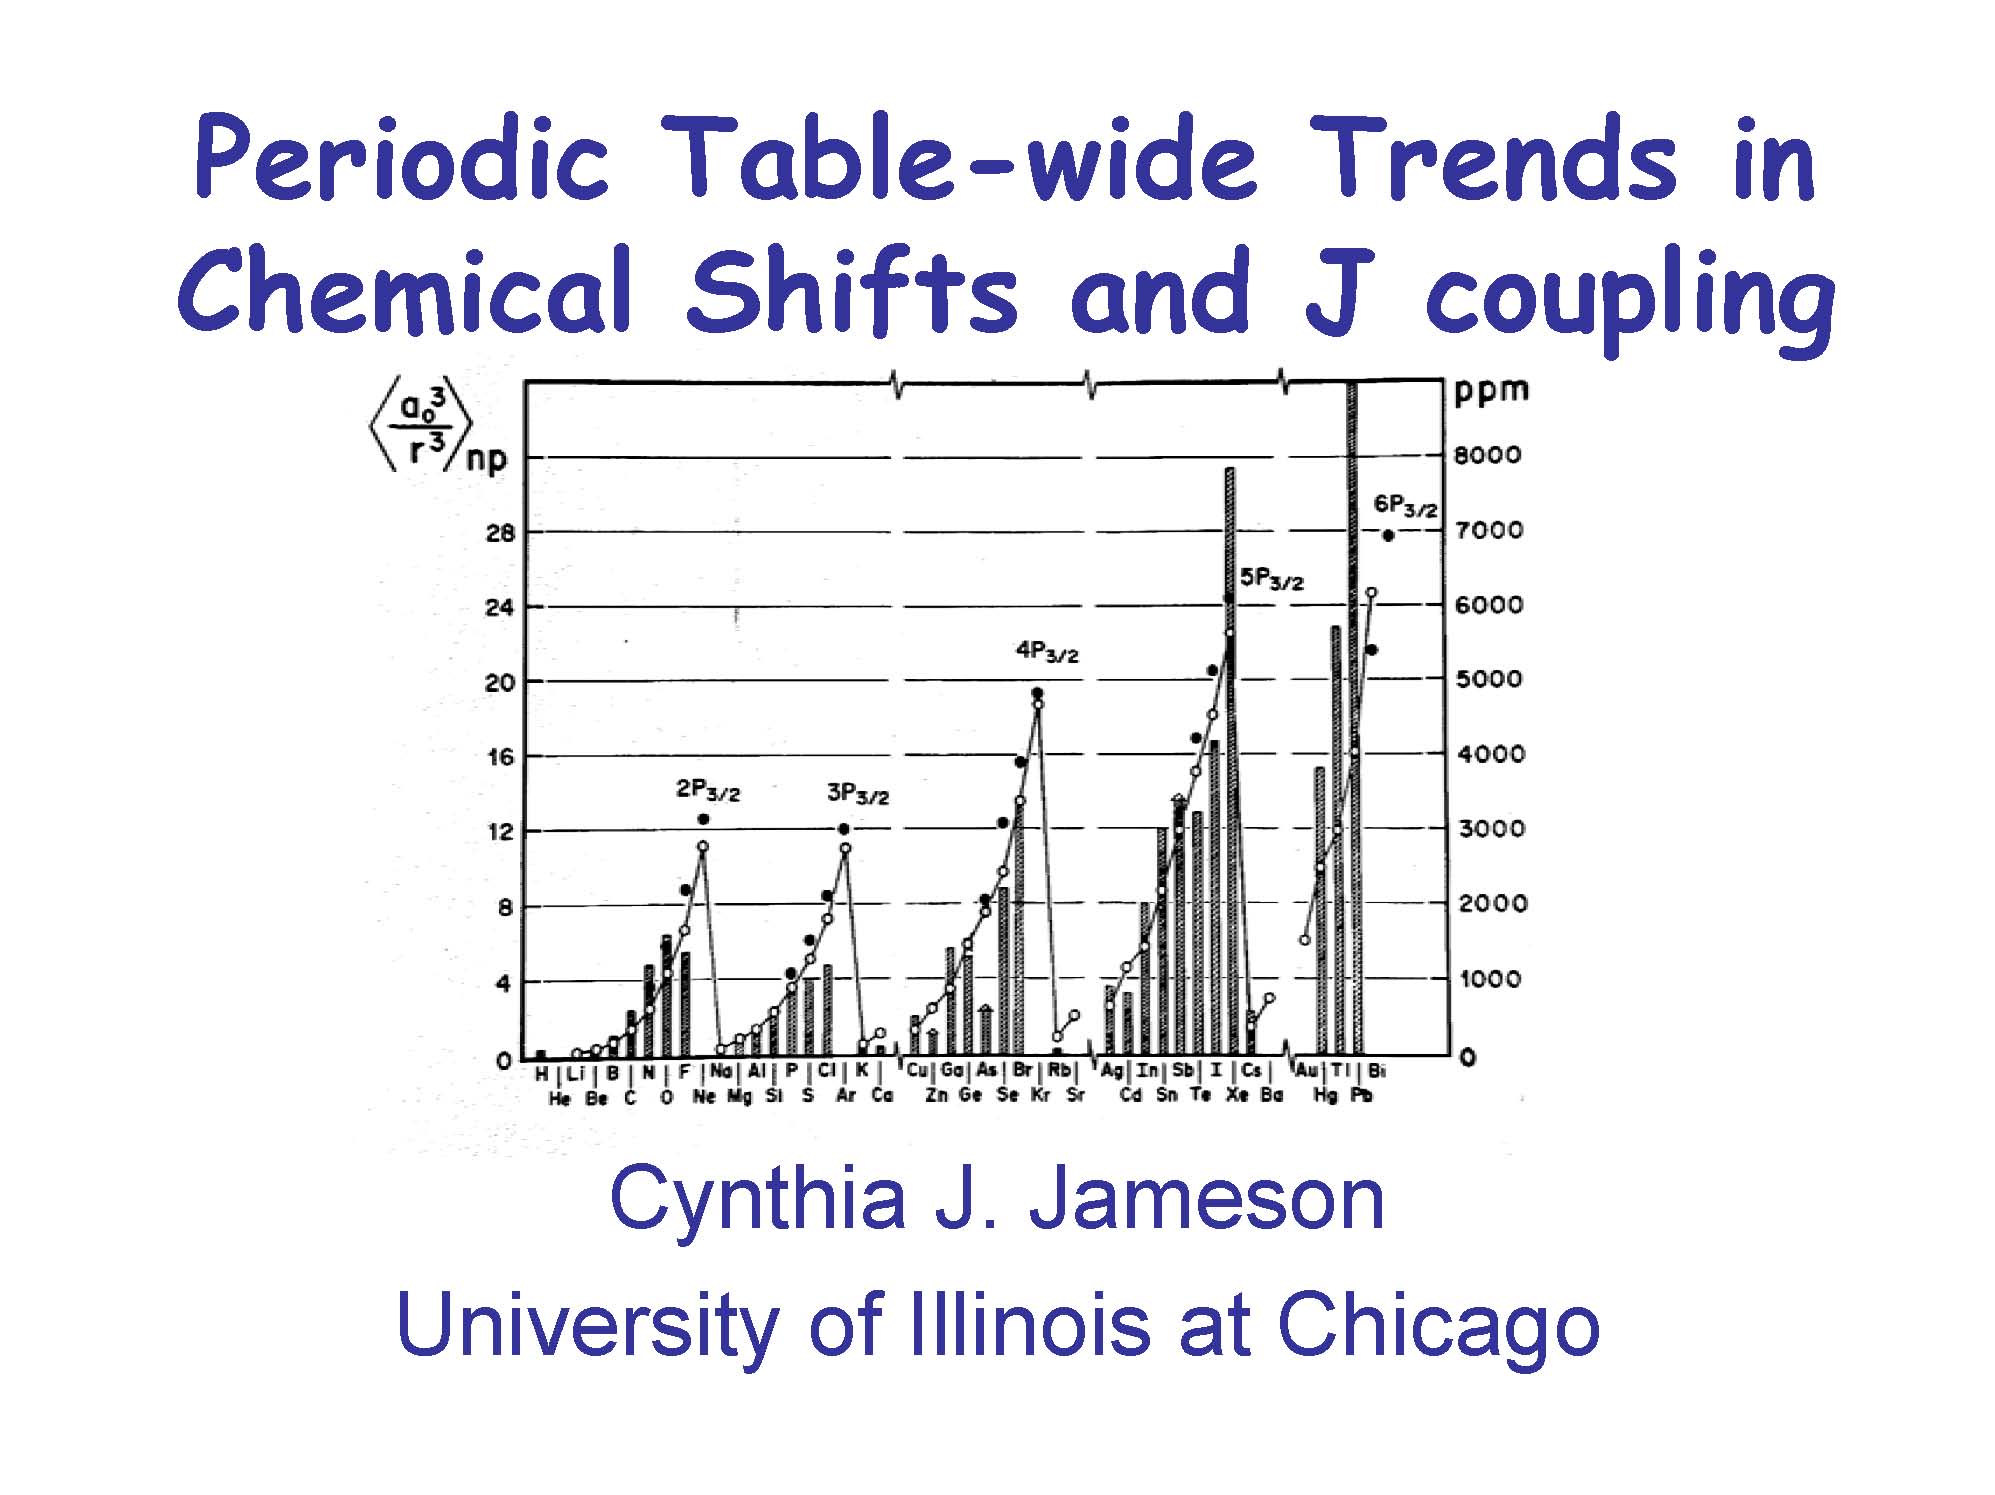 Periodic-Table-wide trends in shielding and J